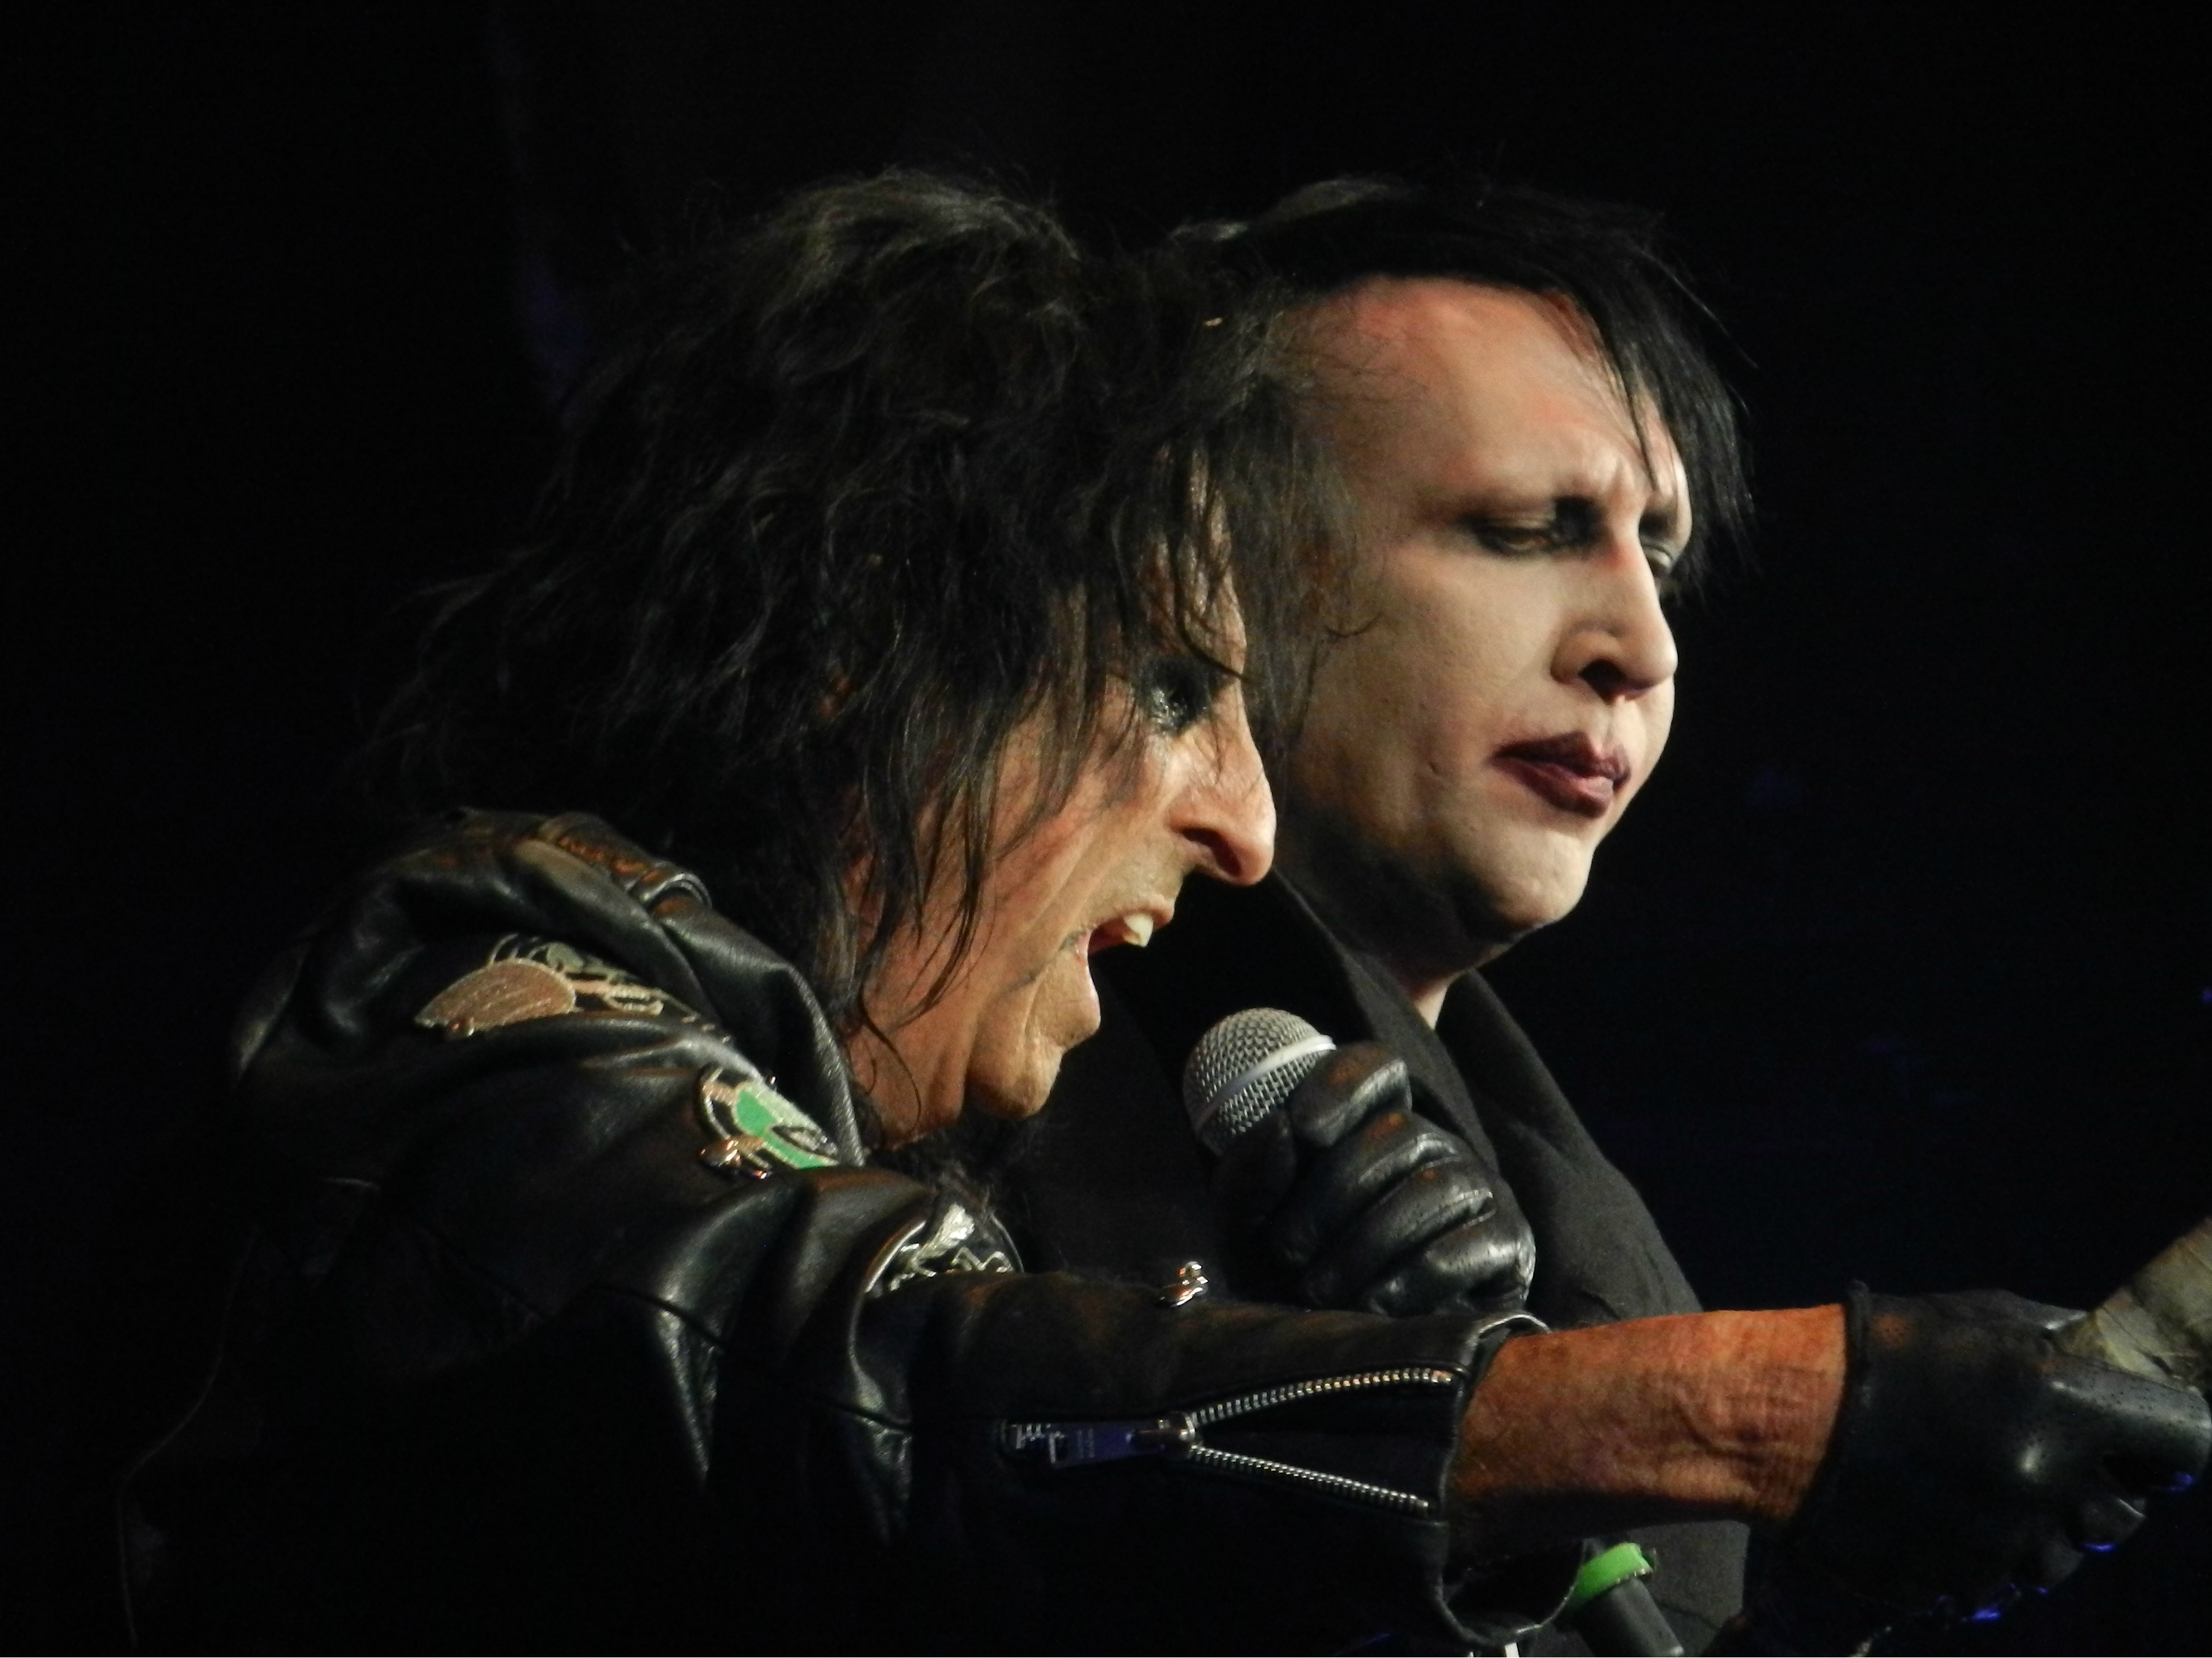 Alice Cooper and Marilyn Manson